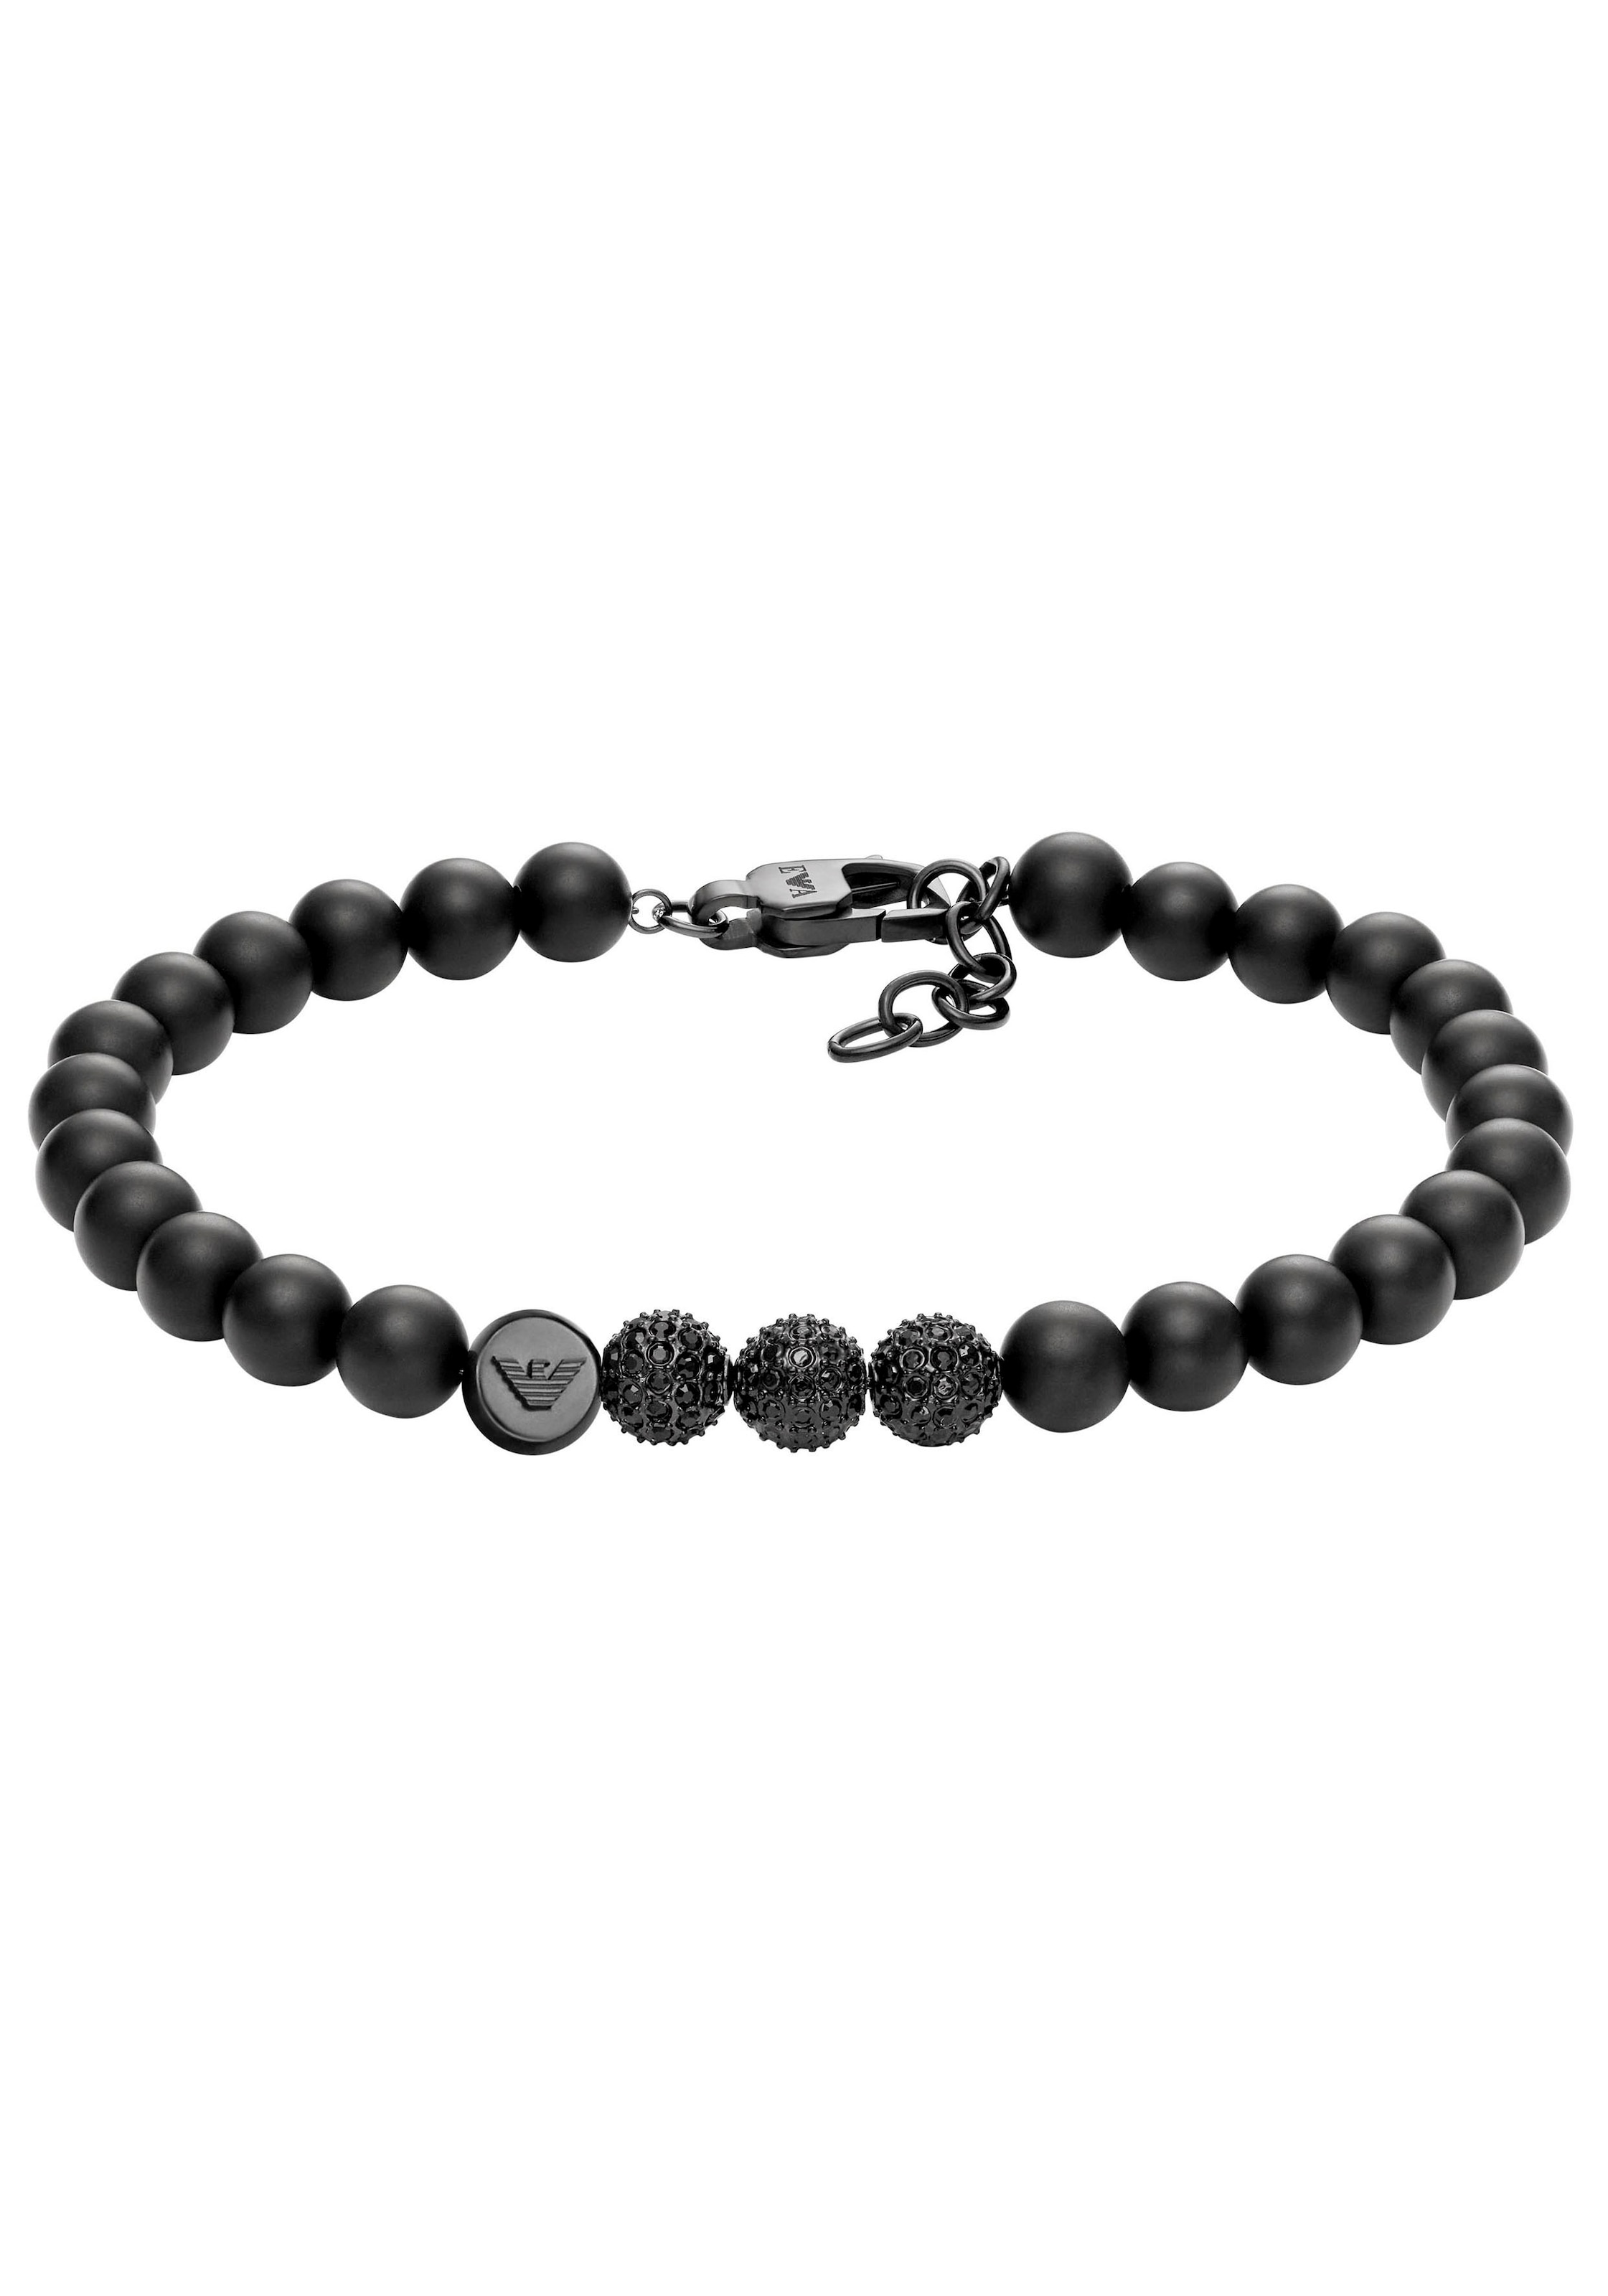 Onyx PAVE, Armband »ICONIC Emporio | TREND, mit BEADS EGS3030001«, Gagat Armani AND BAUR und